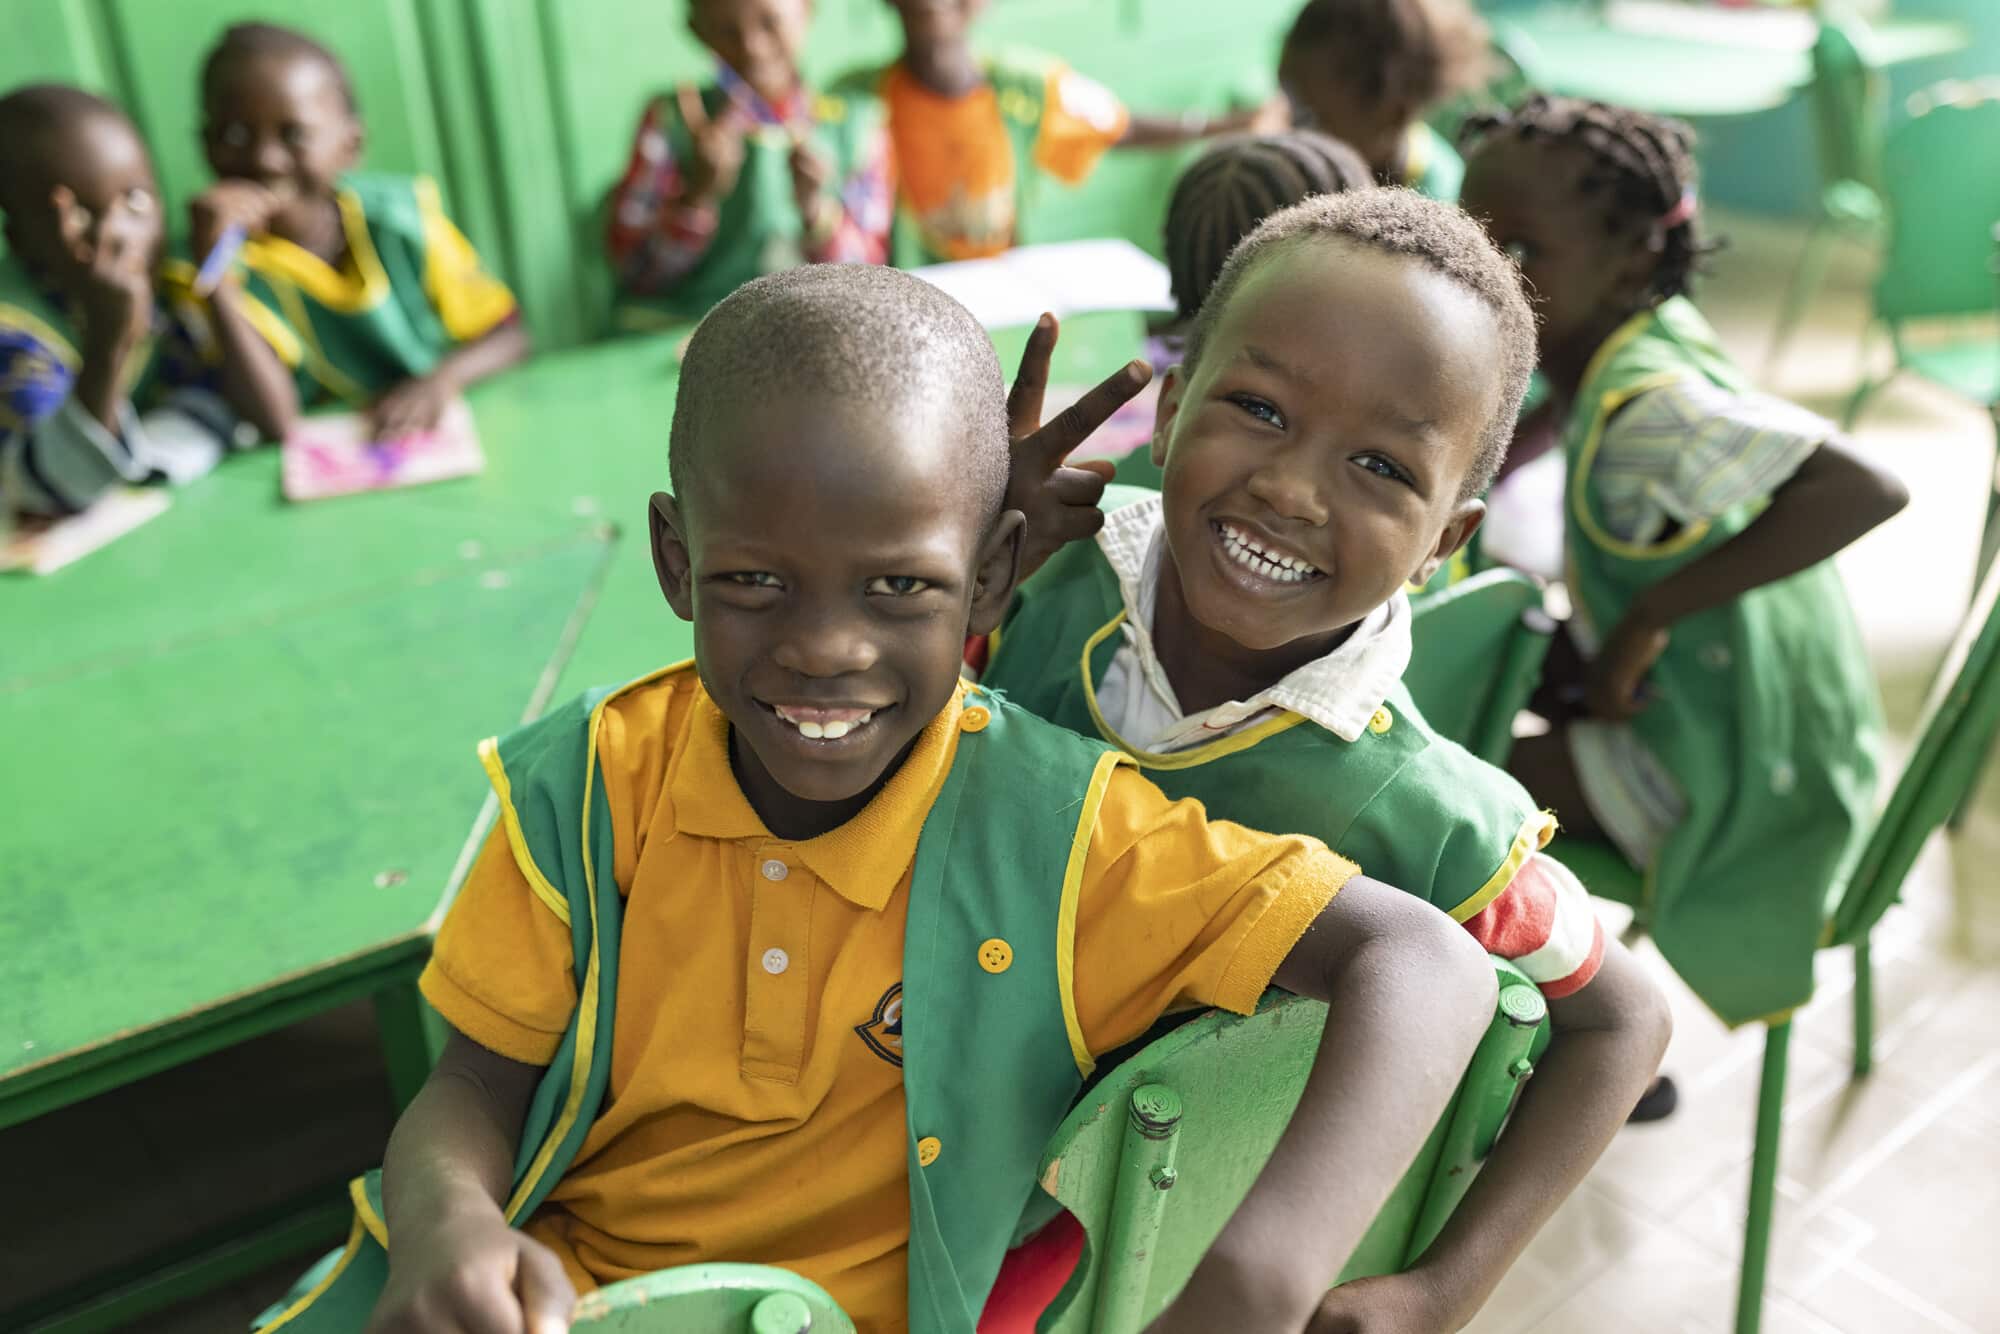 Abdallah (5, L) and Alassane (5, R) sit together at a ChildFund-supported ECD center in Ziguinchor Region, Senegal.

“Tell me what your childhood was like, I’ll tell you who you are. It is here that the children develop their confidence, their abilities, health outcomes and intelligence. This is what we foster,” says ECD director Maimouna Fall.

Ziguinchor Region, Senegal, West Africa.
March 15, 2022. 
Photo by Jake Lyell for ChildFund.